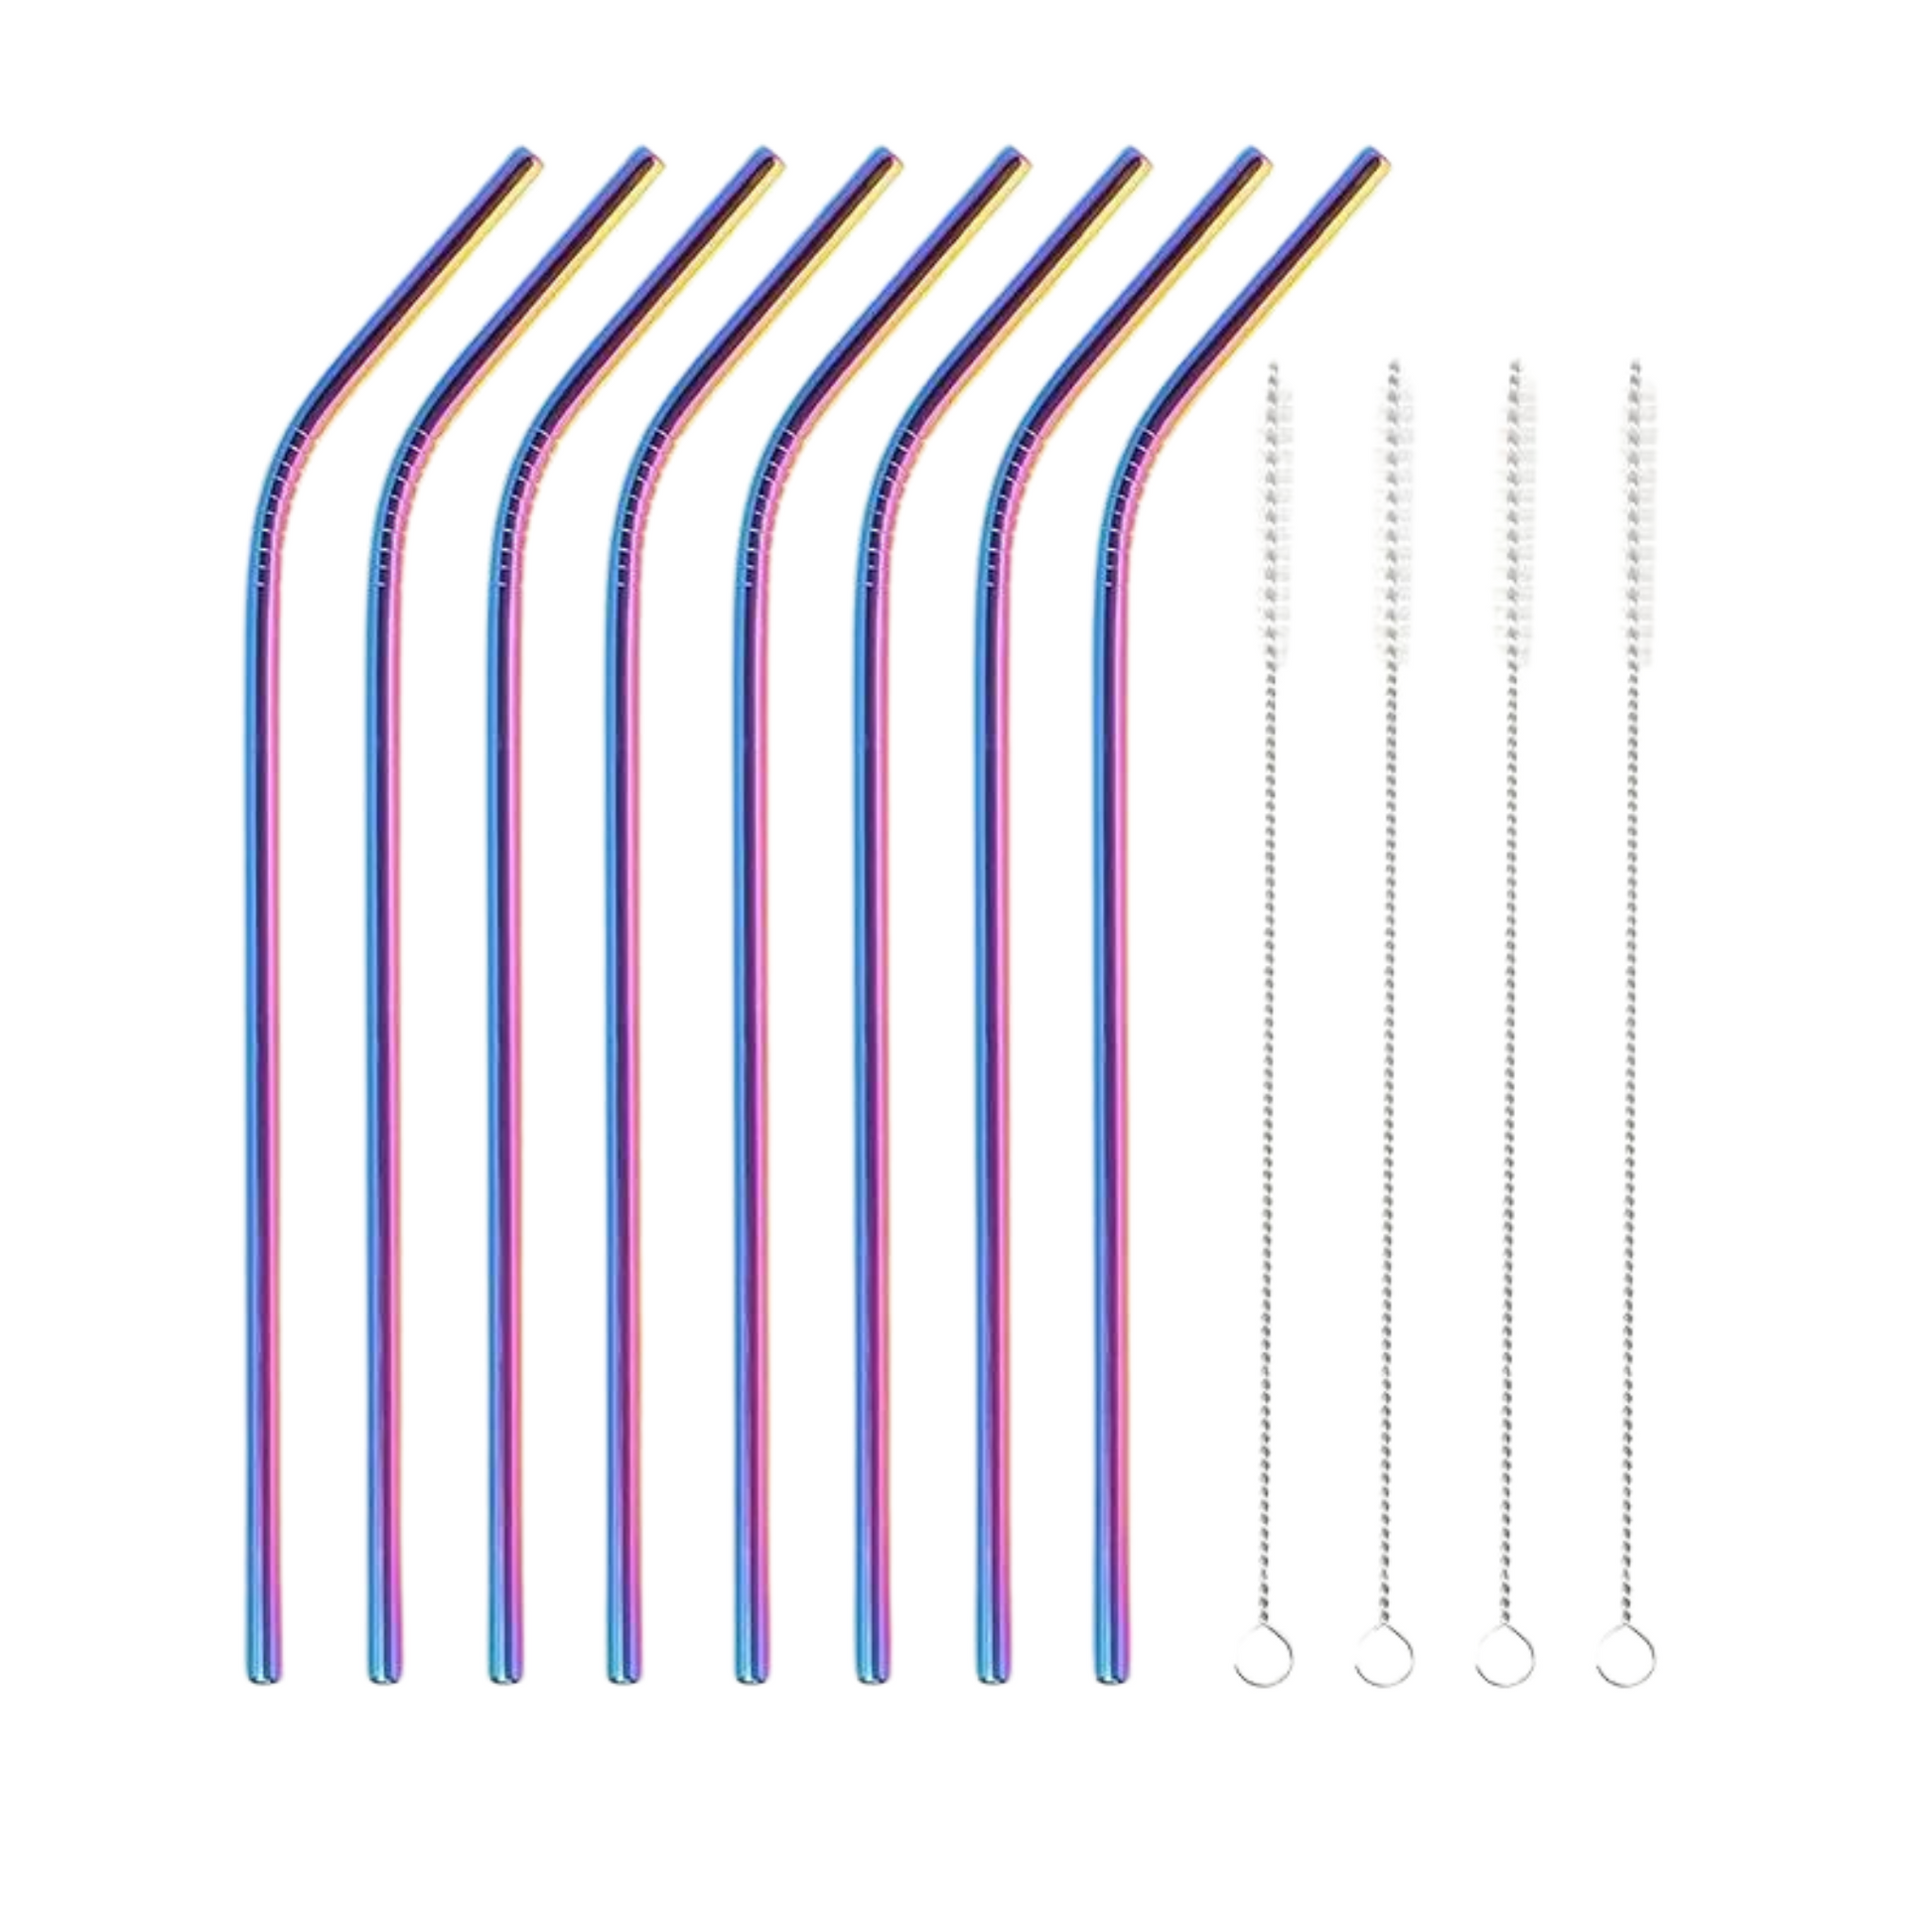 8 rainbow bent stainless steel reusable straws with brushes